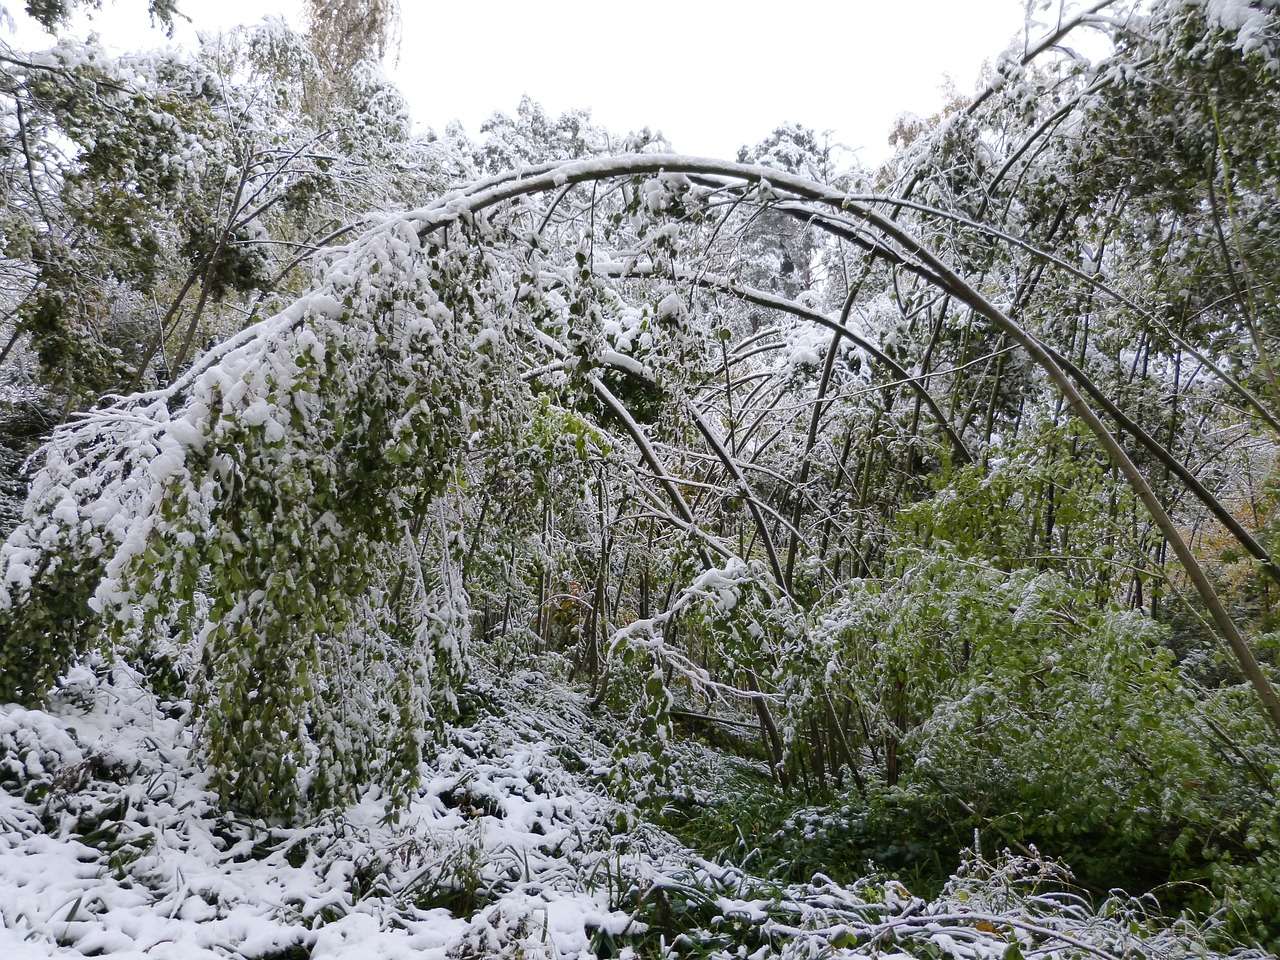 Assessing Winter Damage To Trees, Shrubs And Grasses